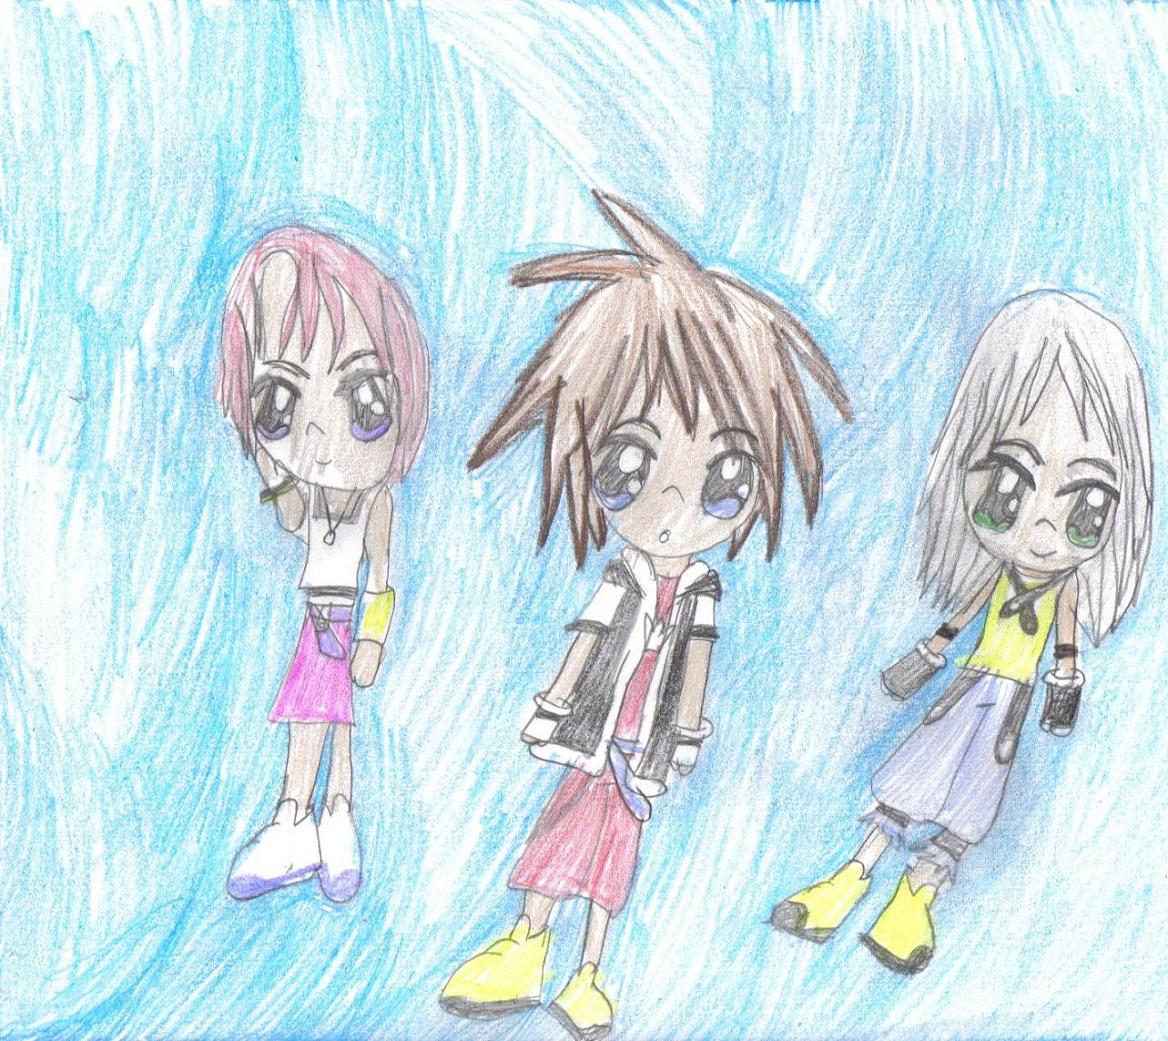 KH Chibis by smurifit